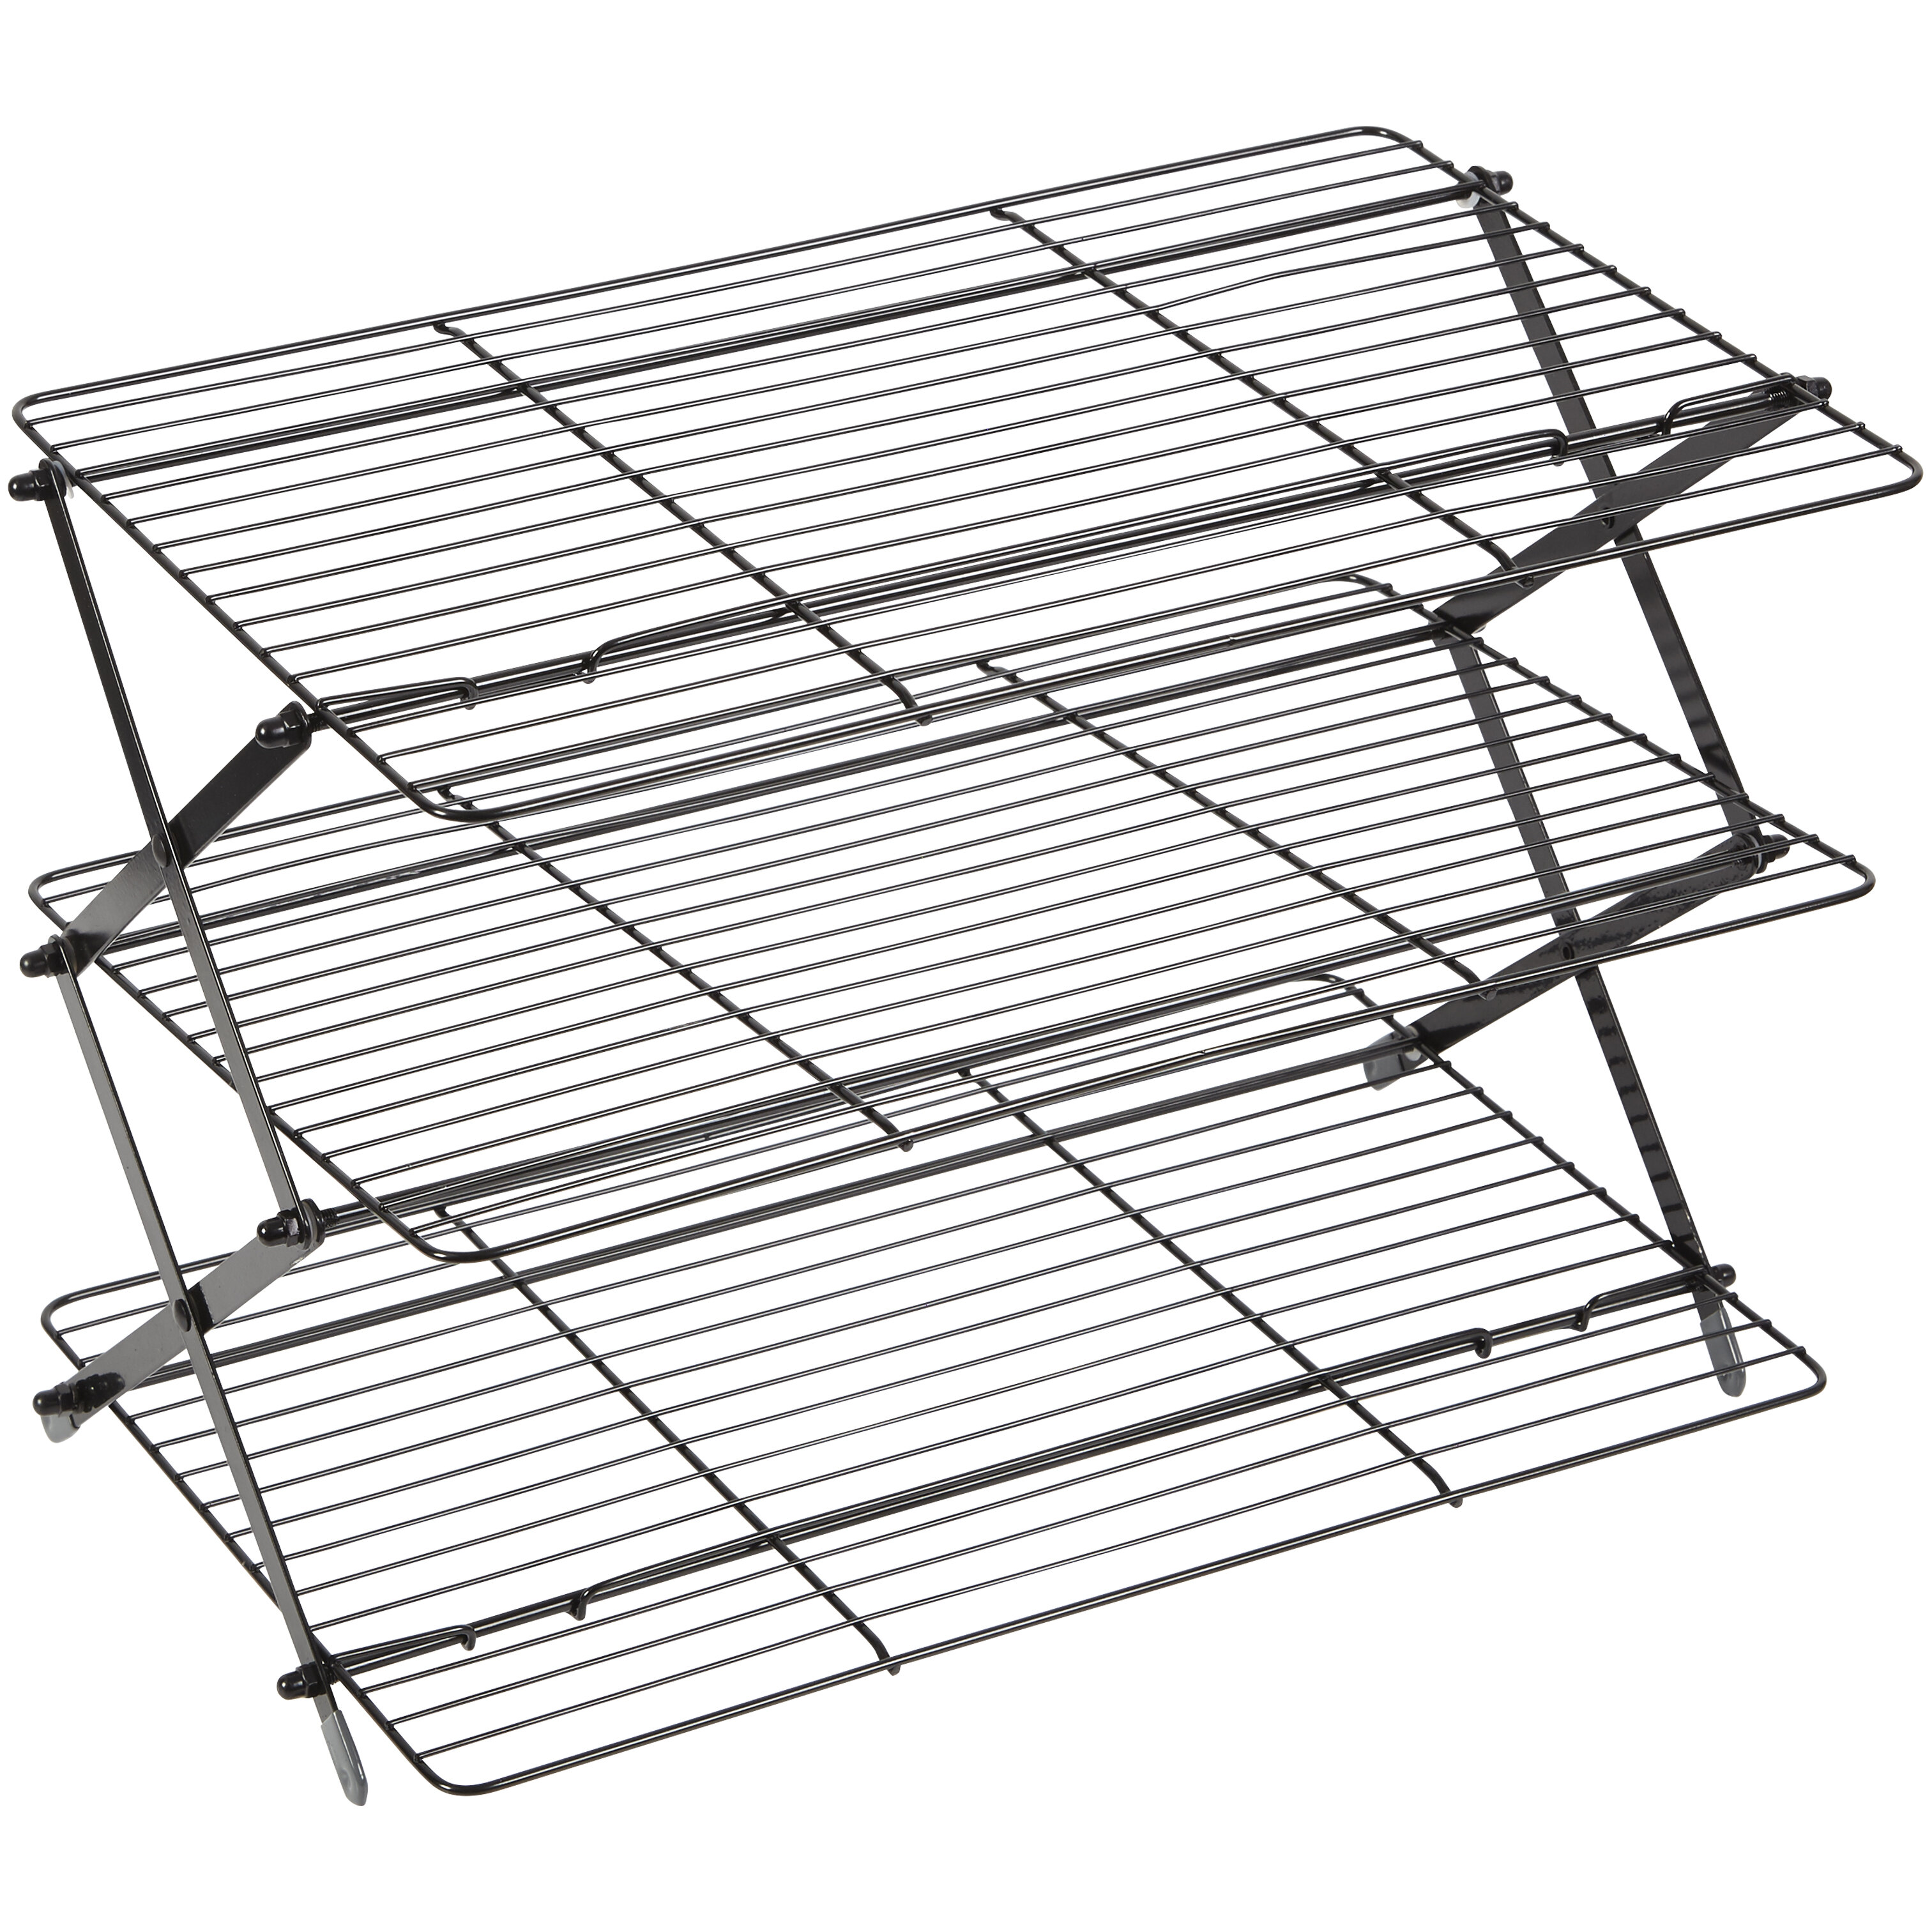 Stainless steel Keewah Small Cooling Rack 2 Pack 9.1 x 6.5 inches